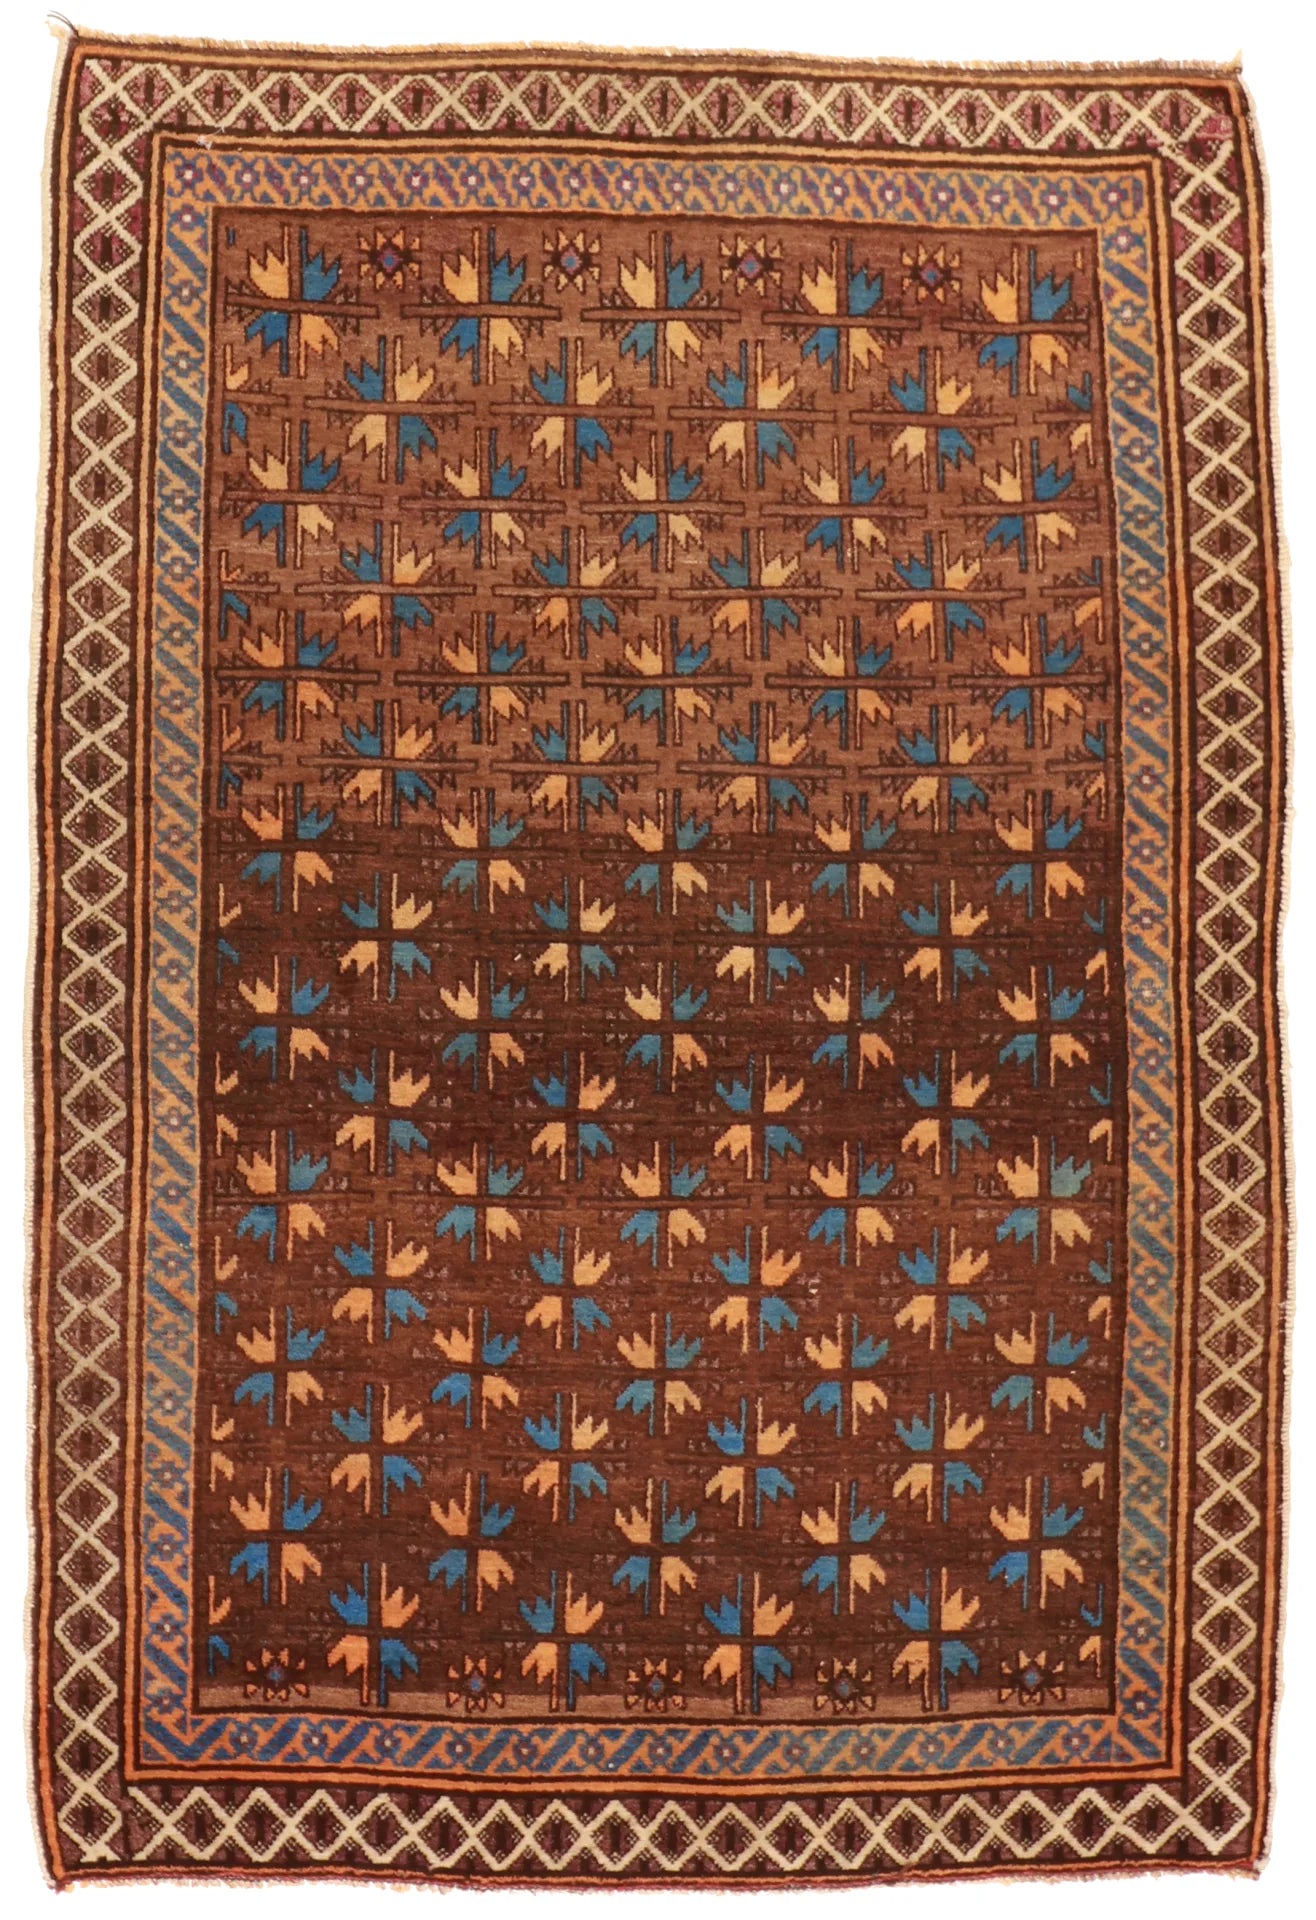 4.5x6.5 - Baluch Fine/Wool Geometric Rectangle - Hand Knotted Rug